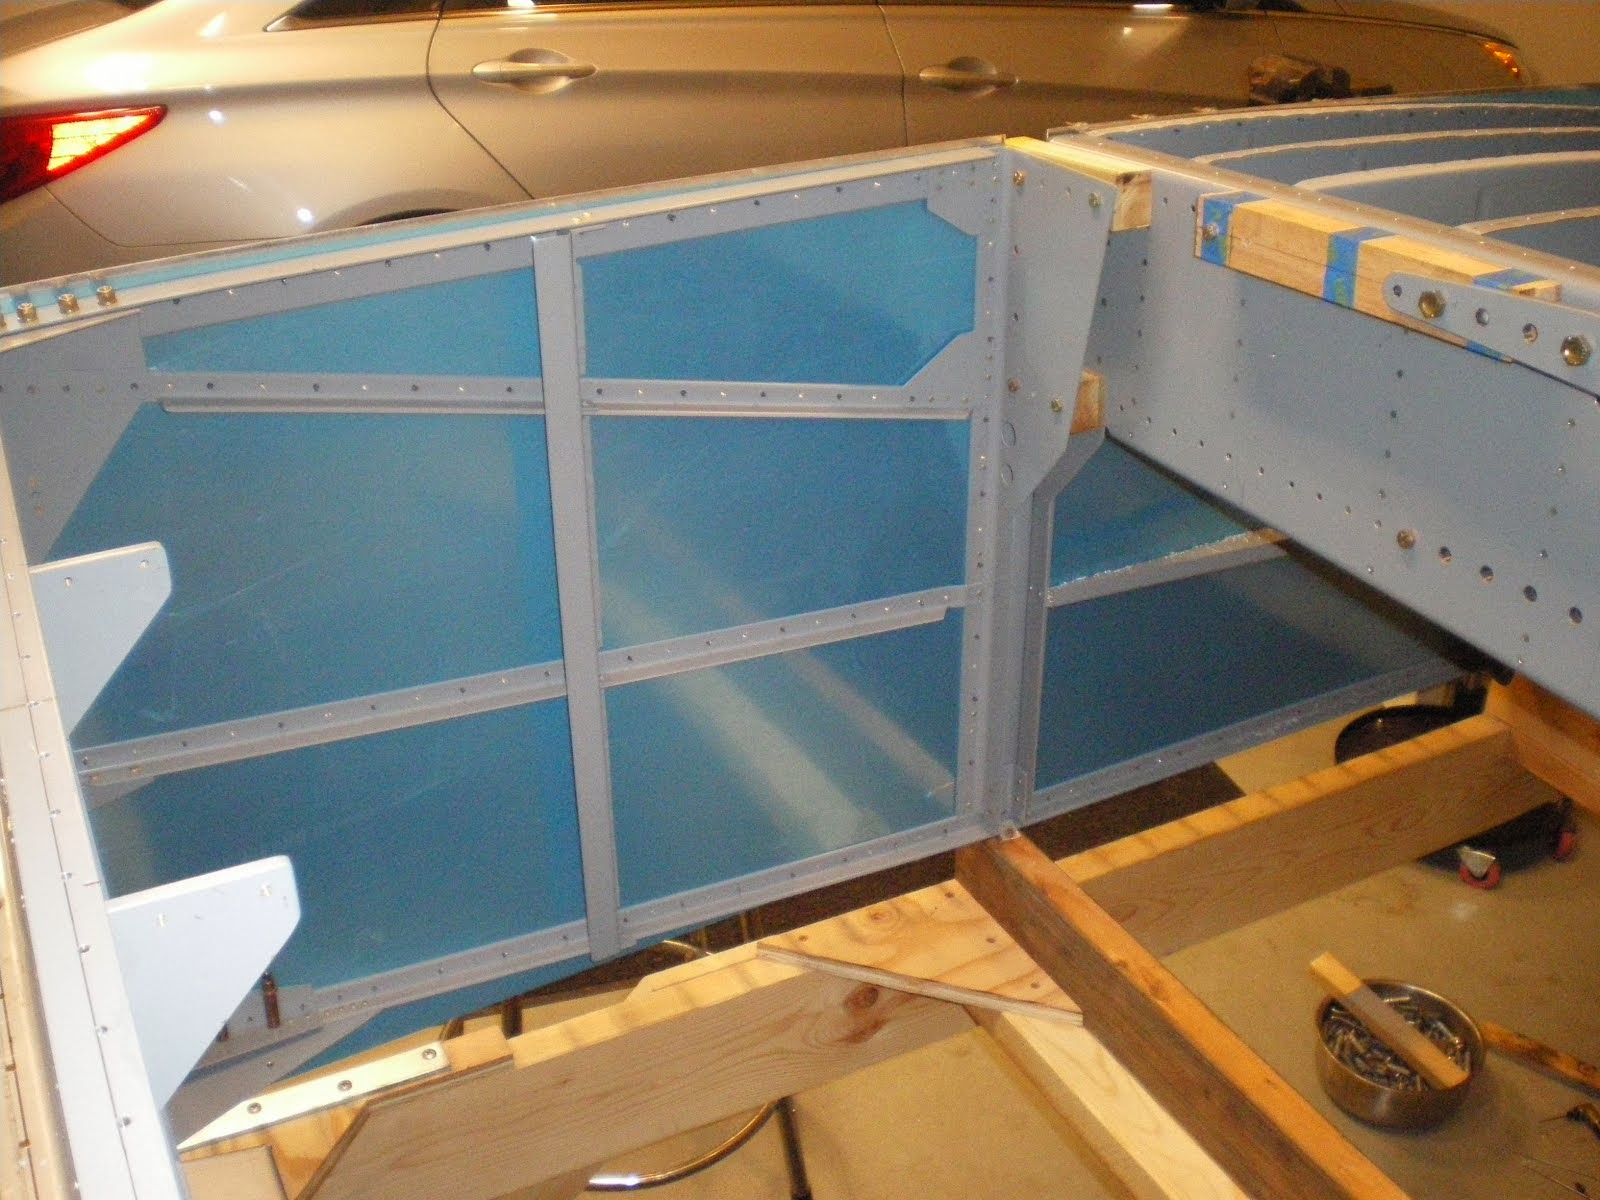 Inside the front fuselage